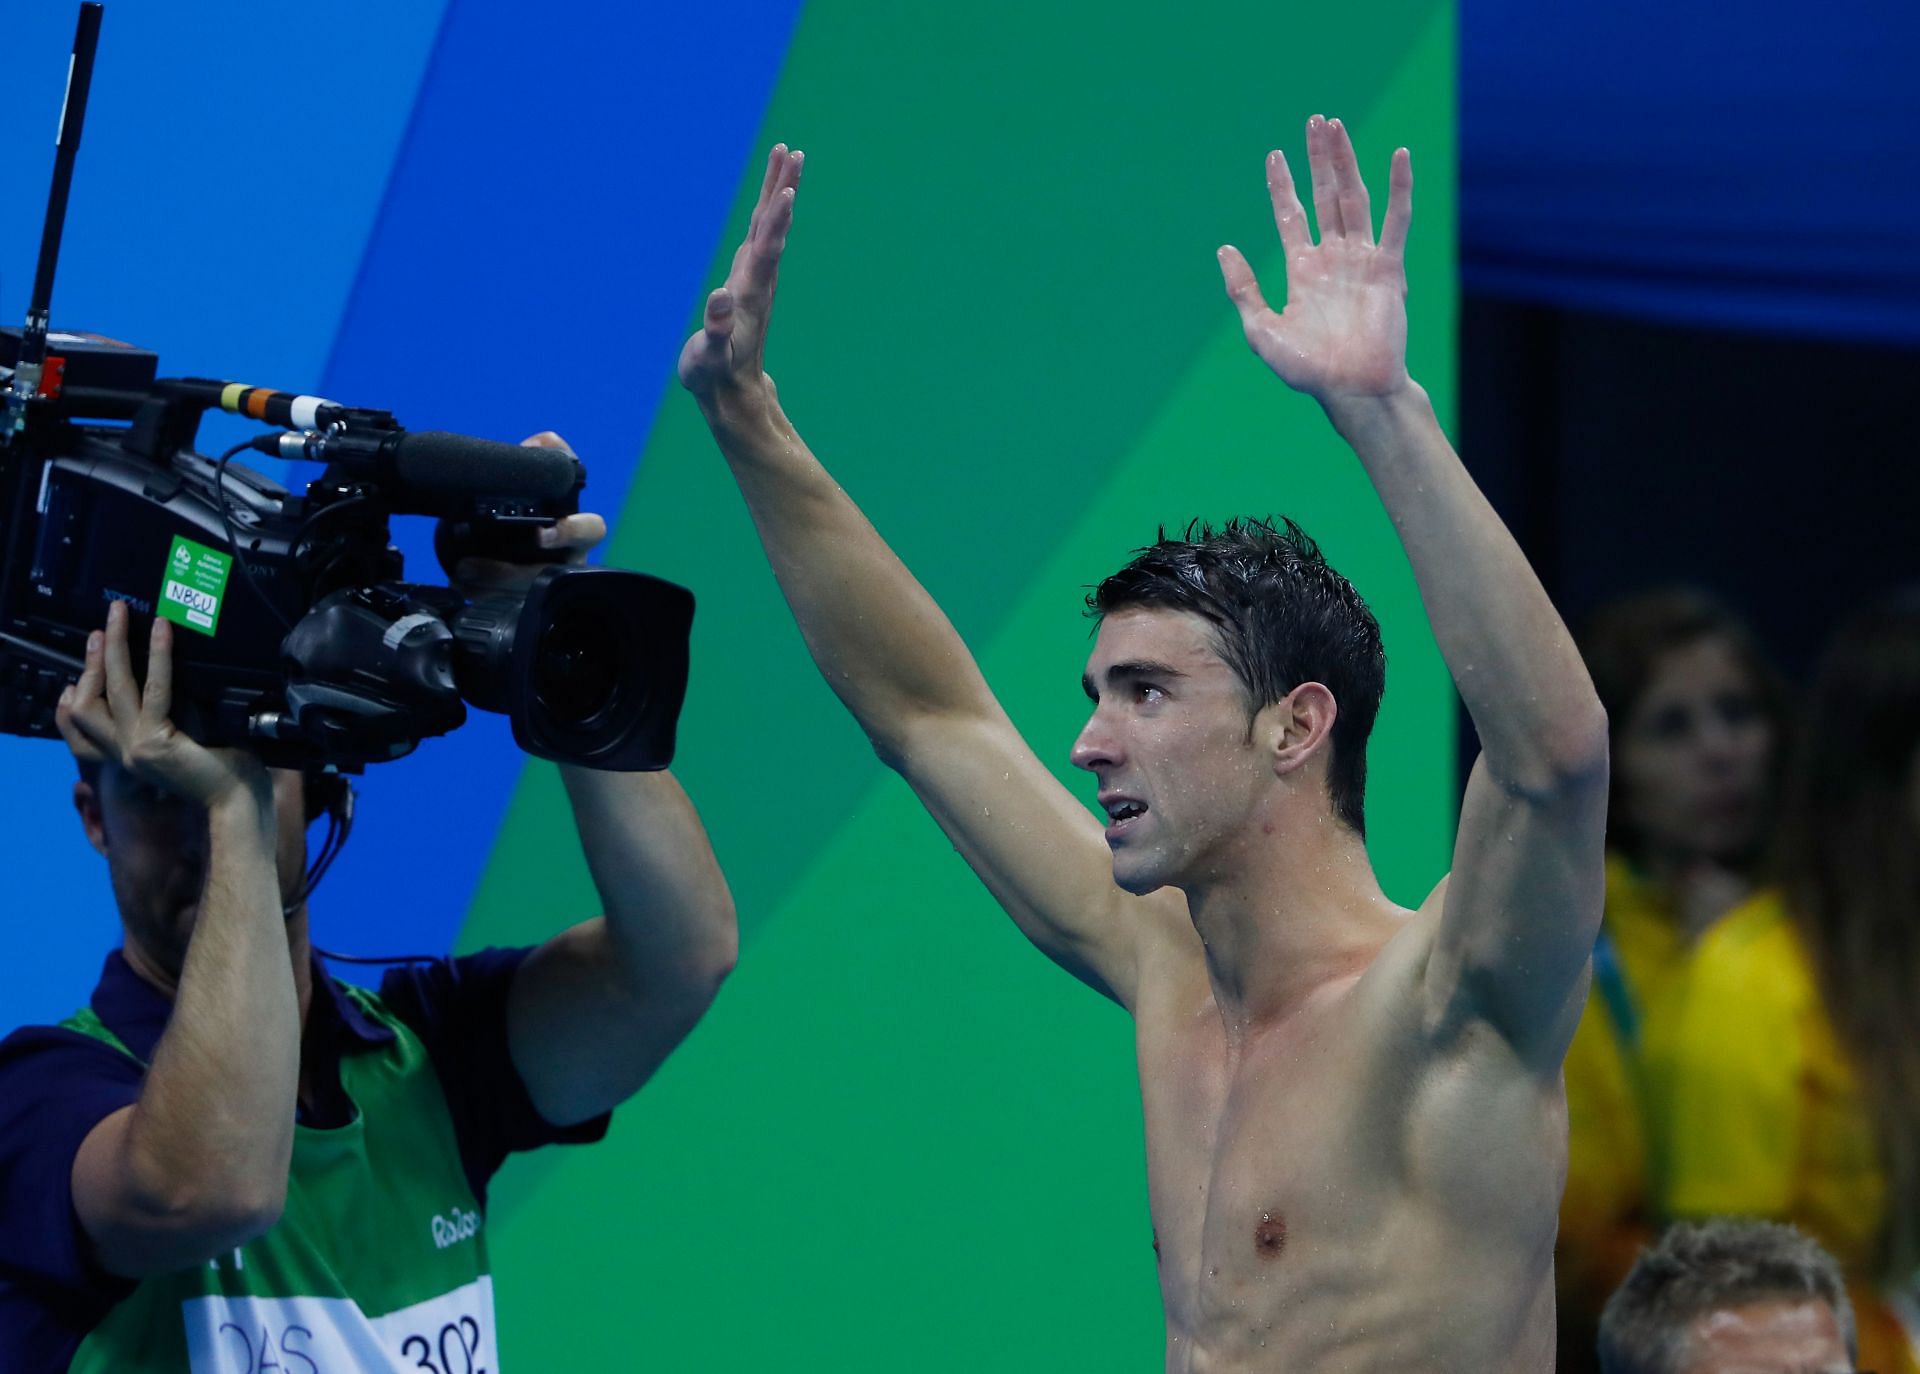 Michael Phelps is the most decorated Olympian of all time